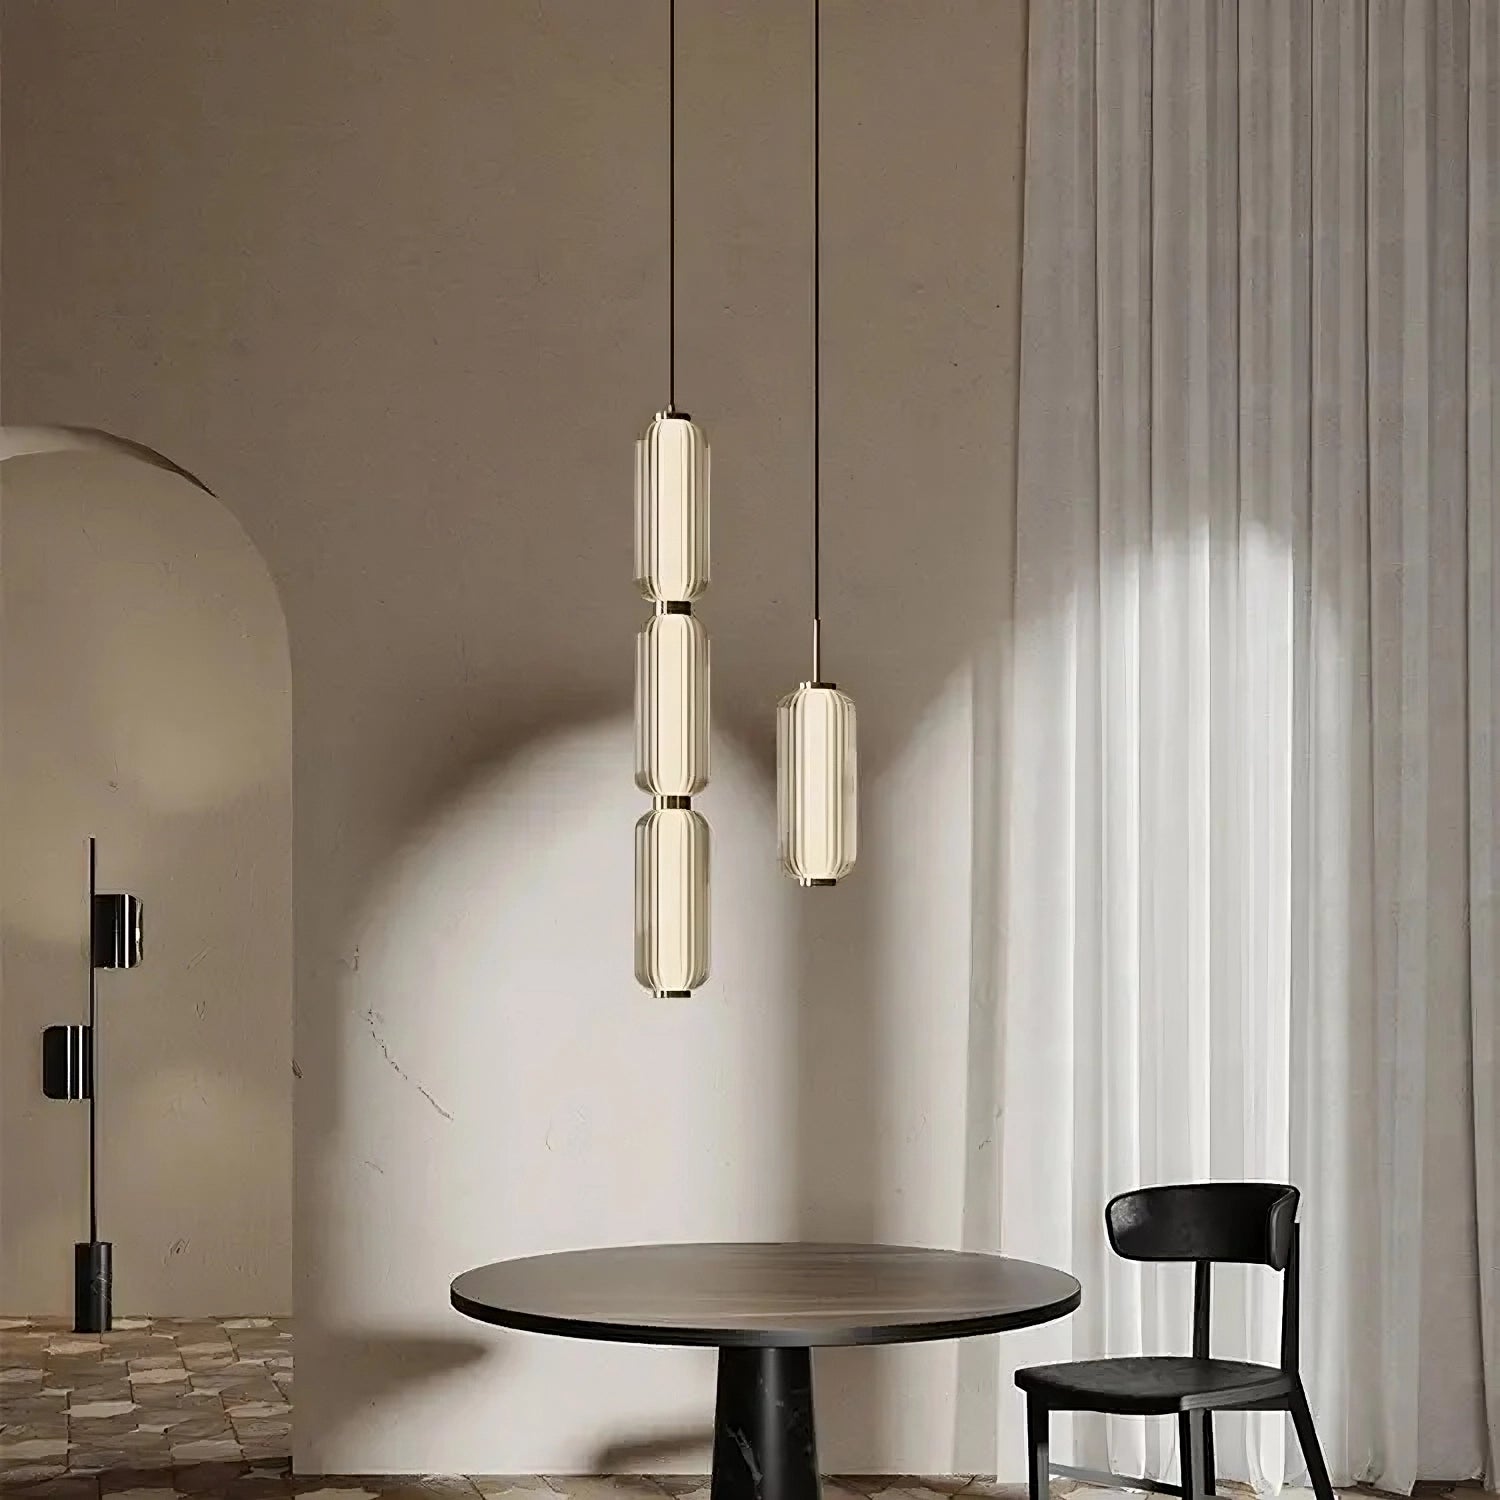 A minimalist room featuring a round, dark wooden table with a black chair beside it. Three elongated Modern Minimalist LED Pendant Light Fixtures from Morsale.com hang from the ceiling, casting illumination. The back wall has an archway and a sheer curtain that allows soft light to filter through.